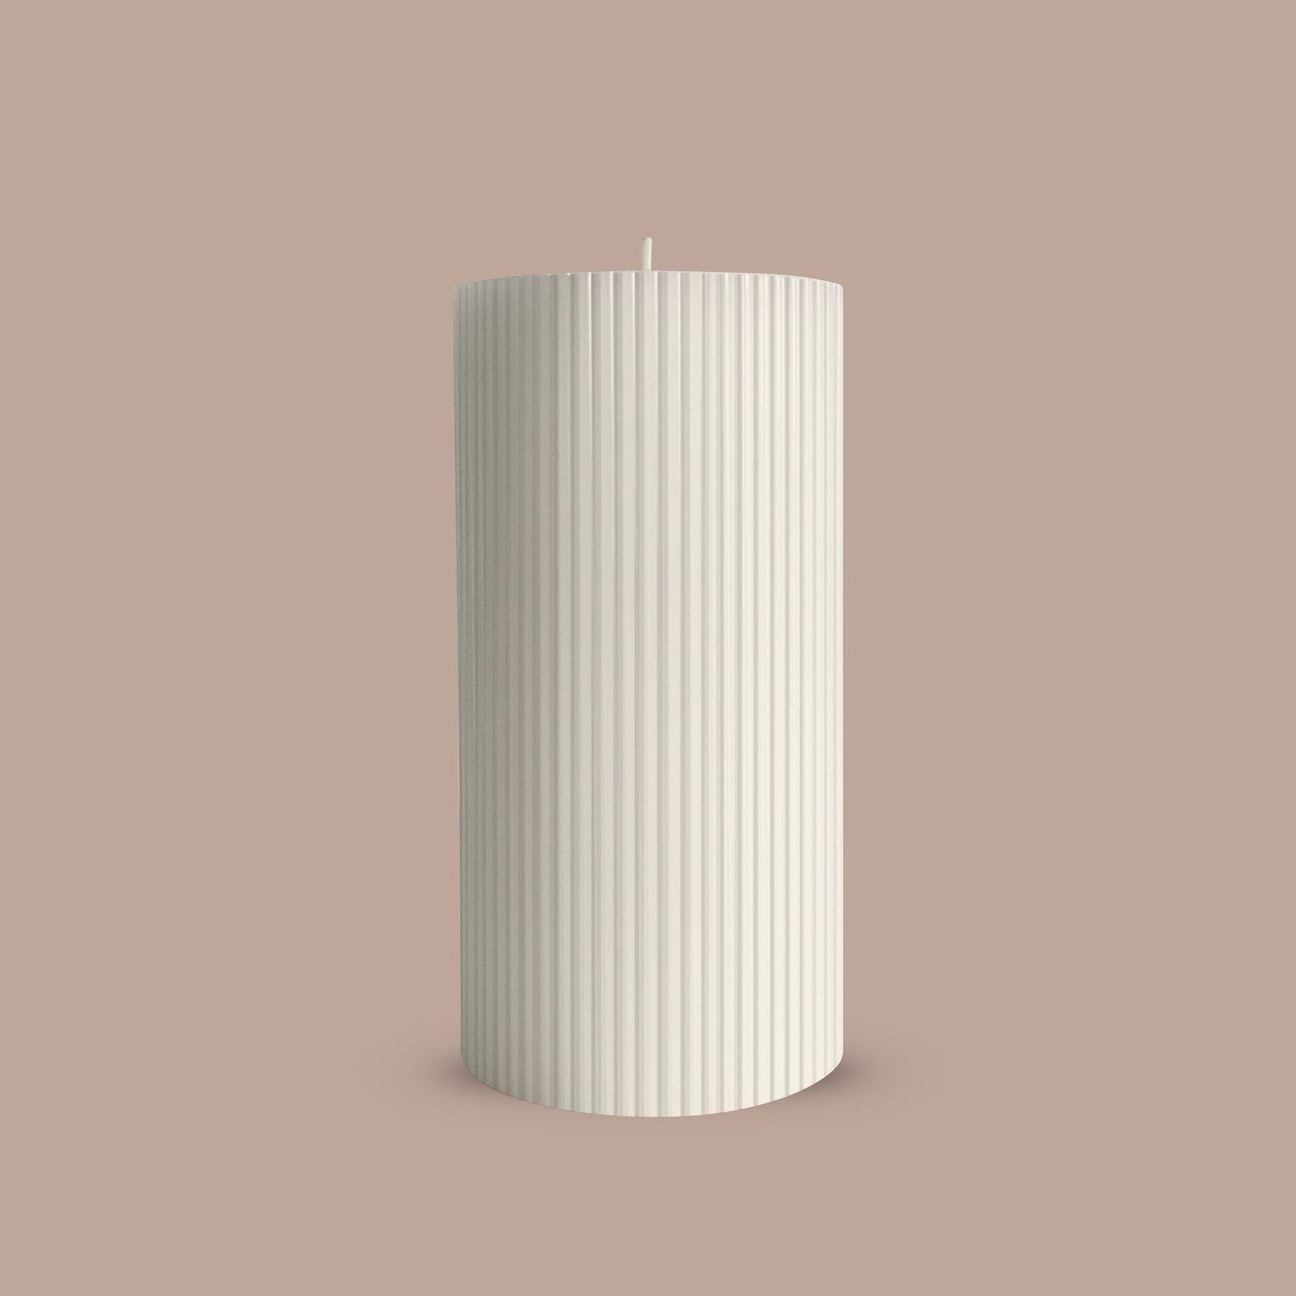 Ripple Candle - Warm White